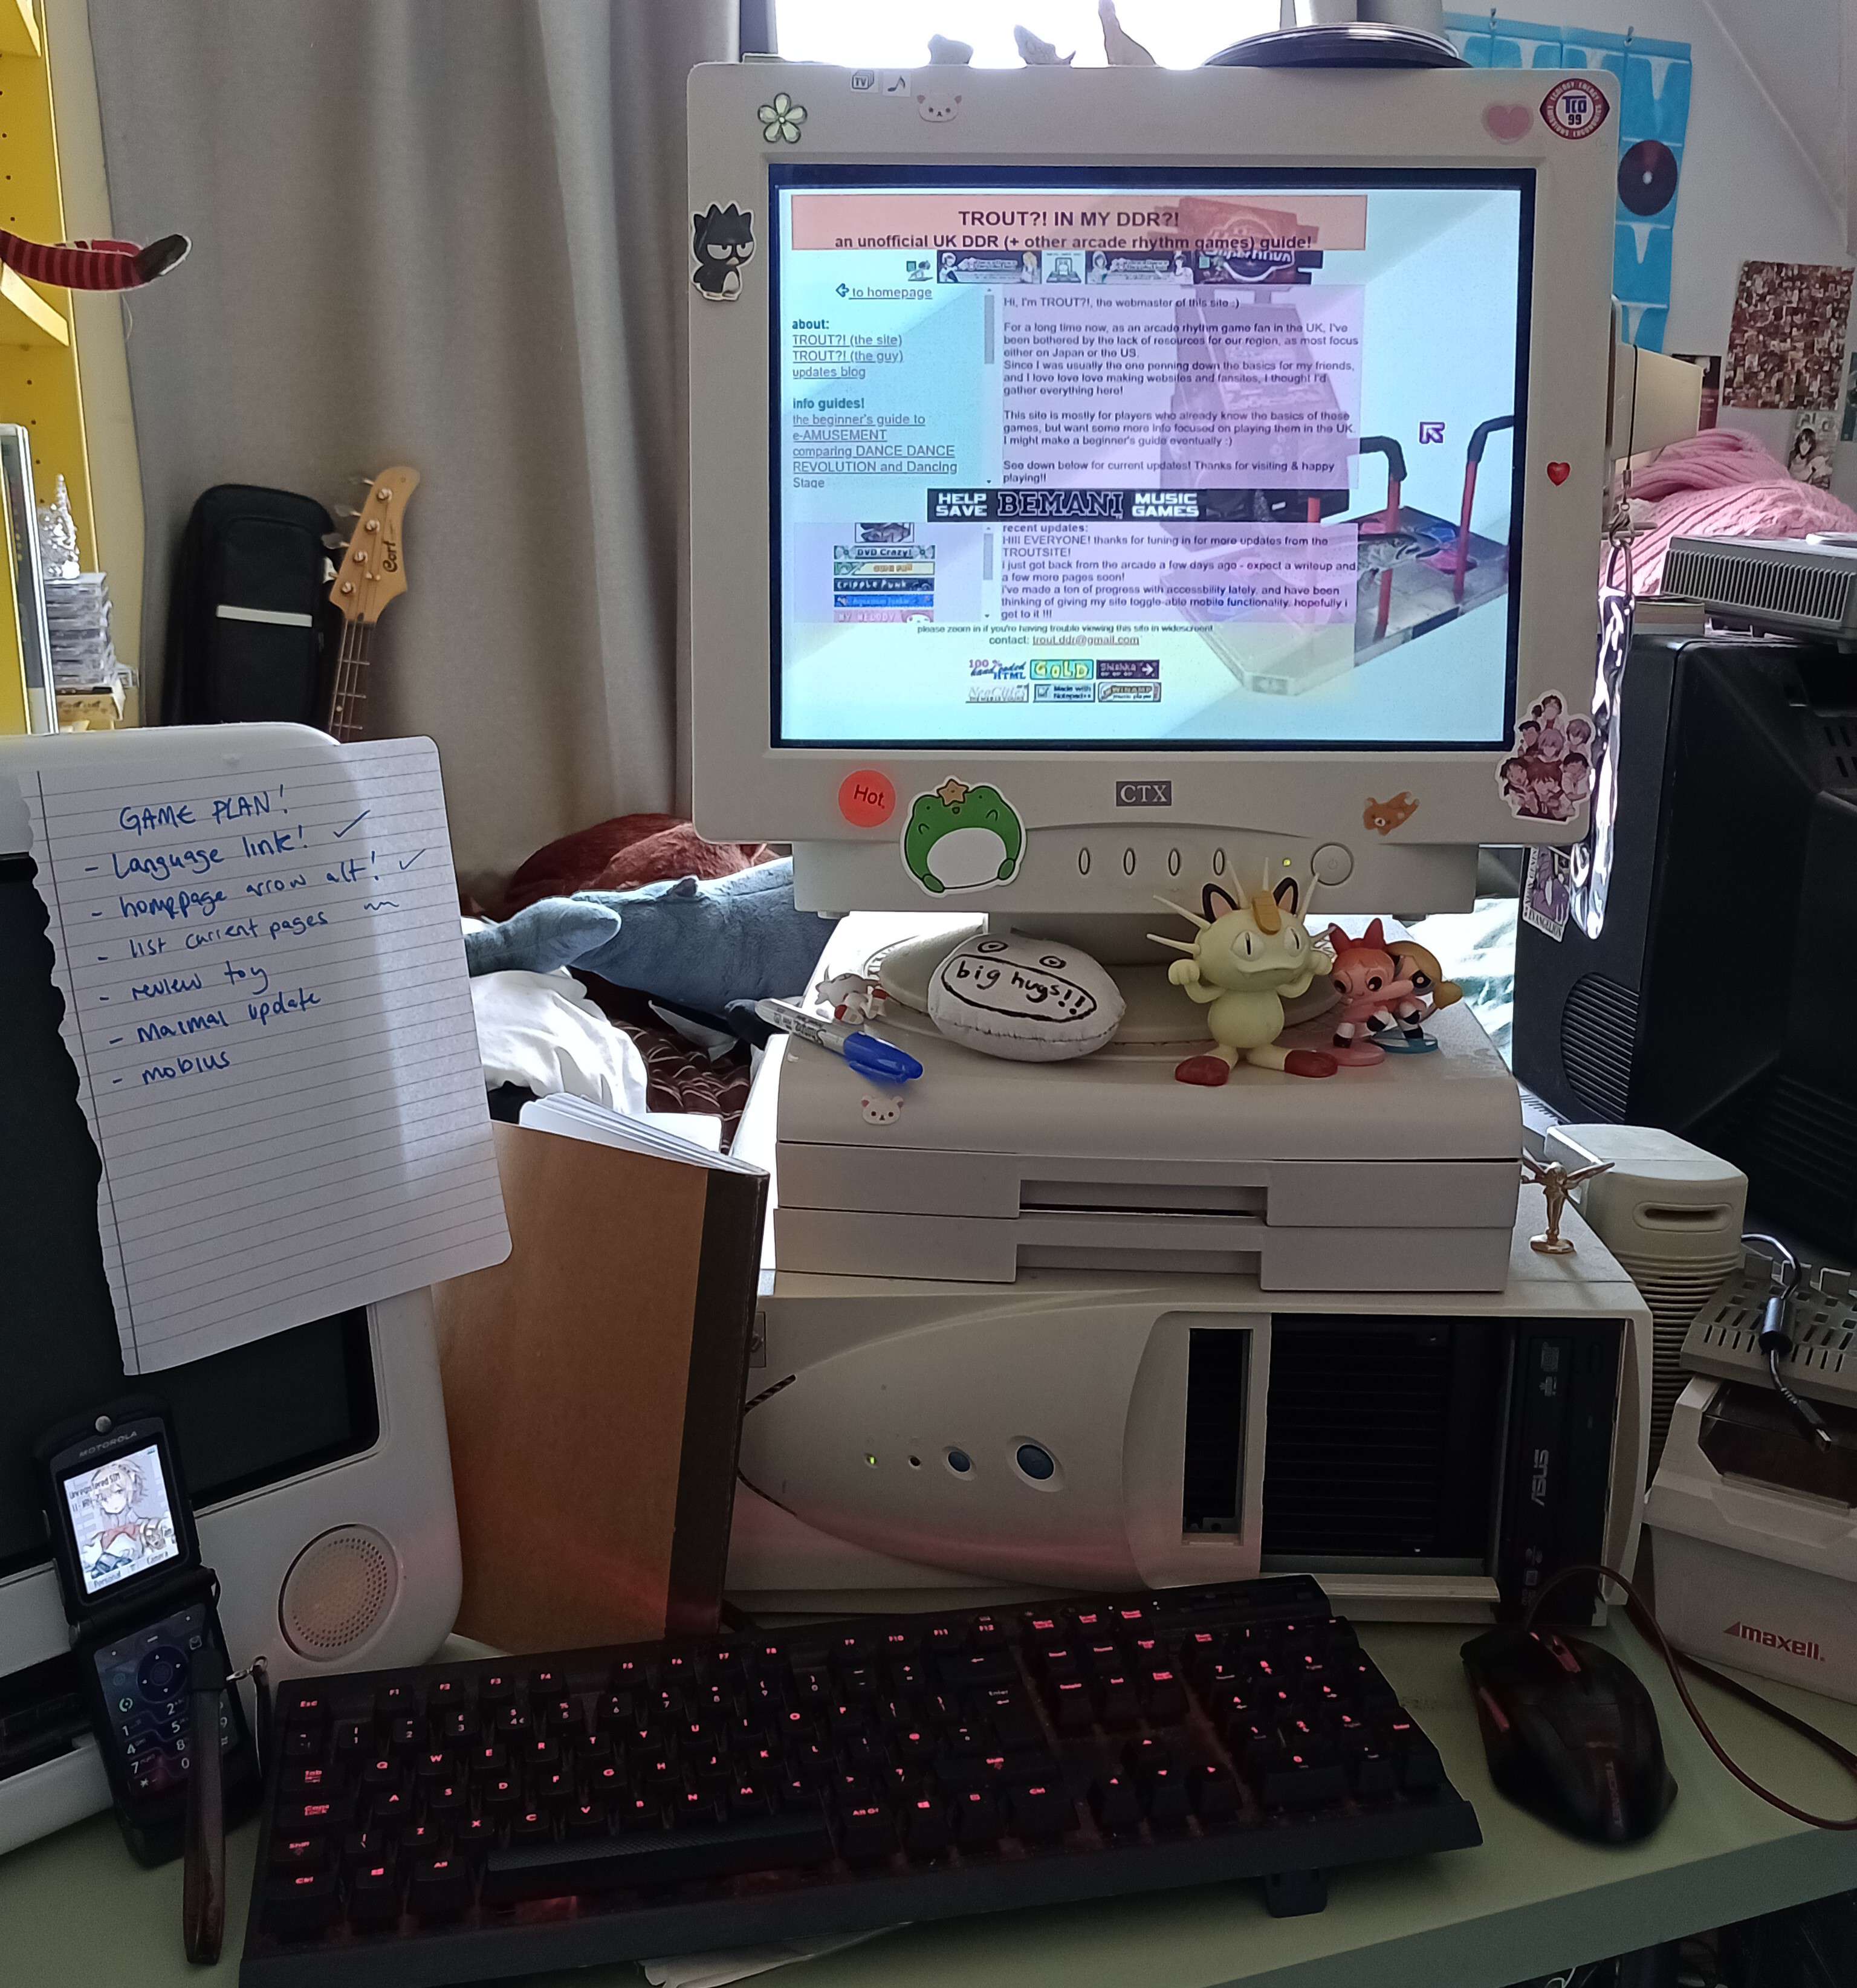 TROUT's computer setup with the square 4 by 3 screen, surrounded by toys and other junk.